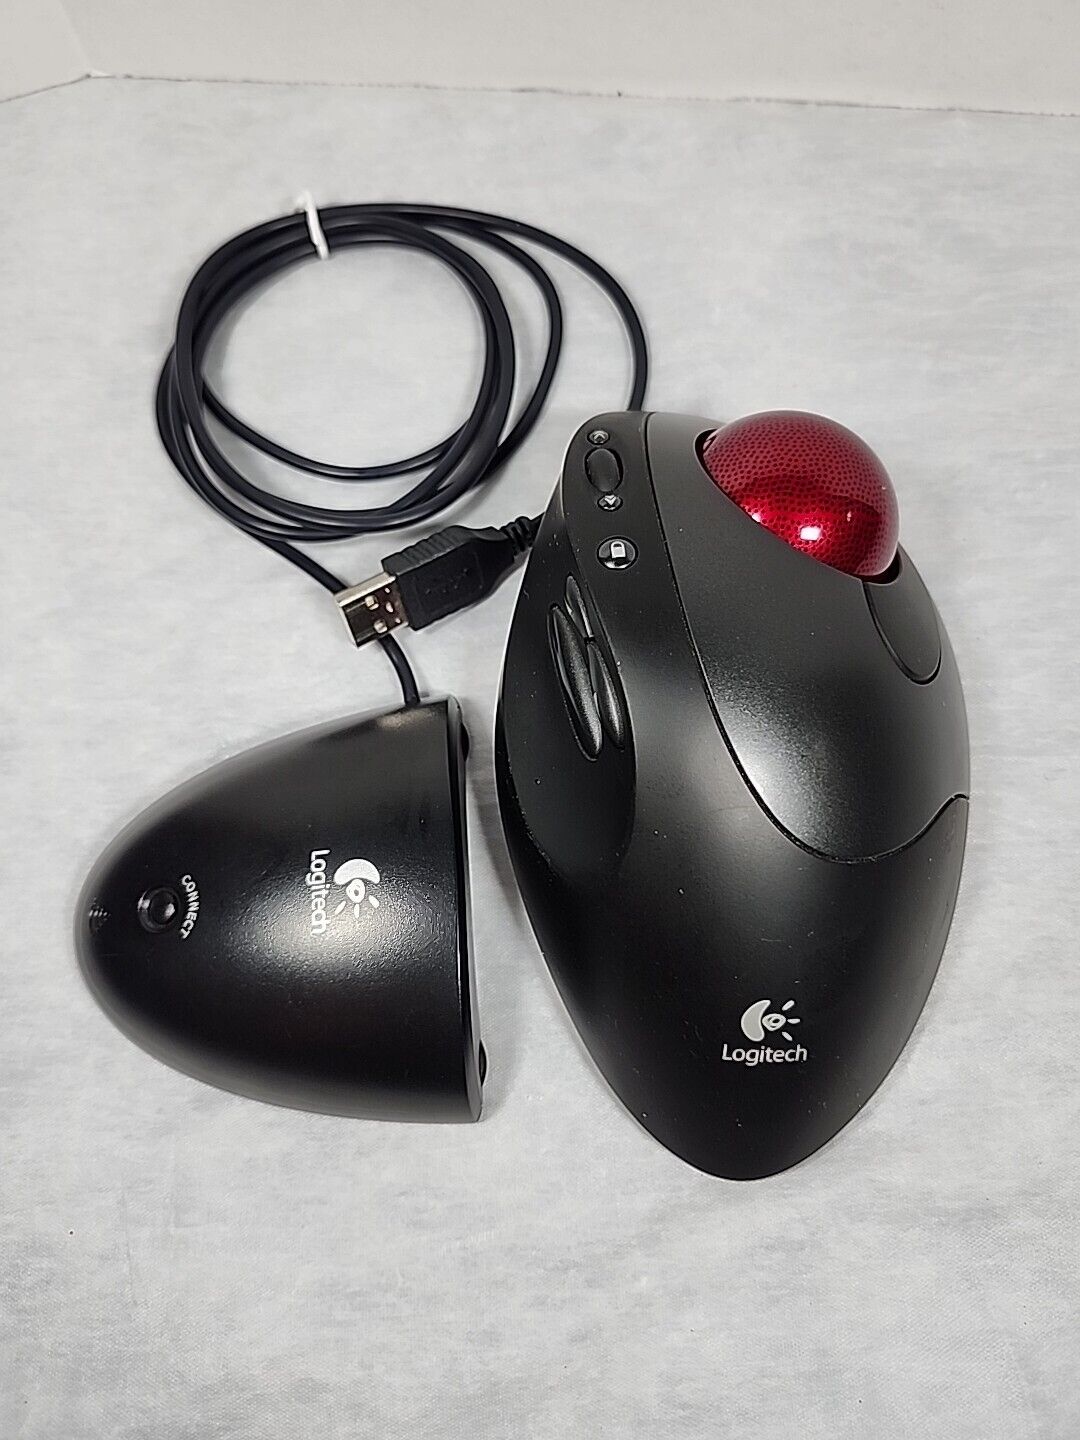 Logitech Cordless Optical TrackMan Trackball Mouse T-RB22 & Receiver Tested Work